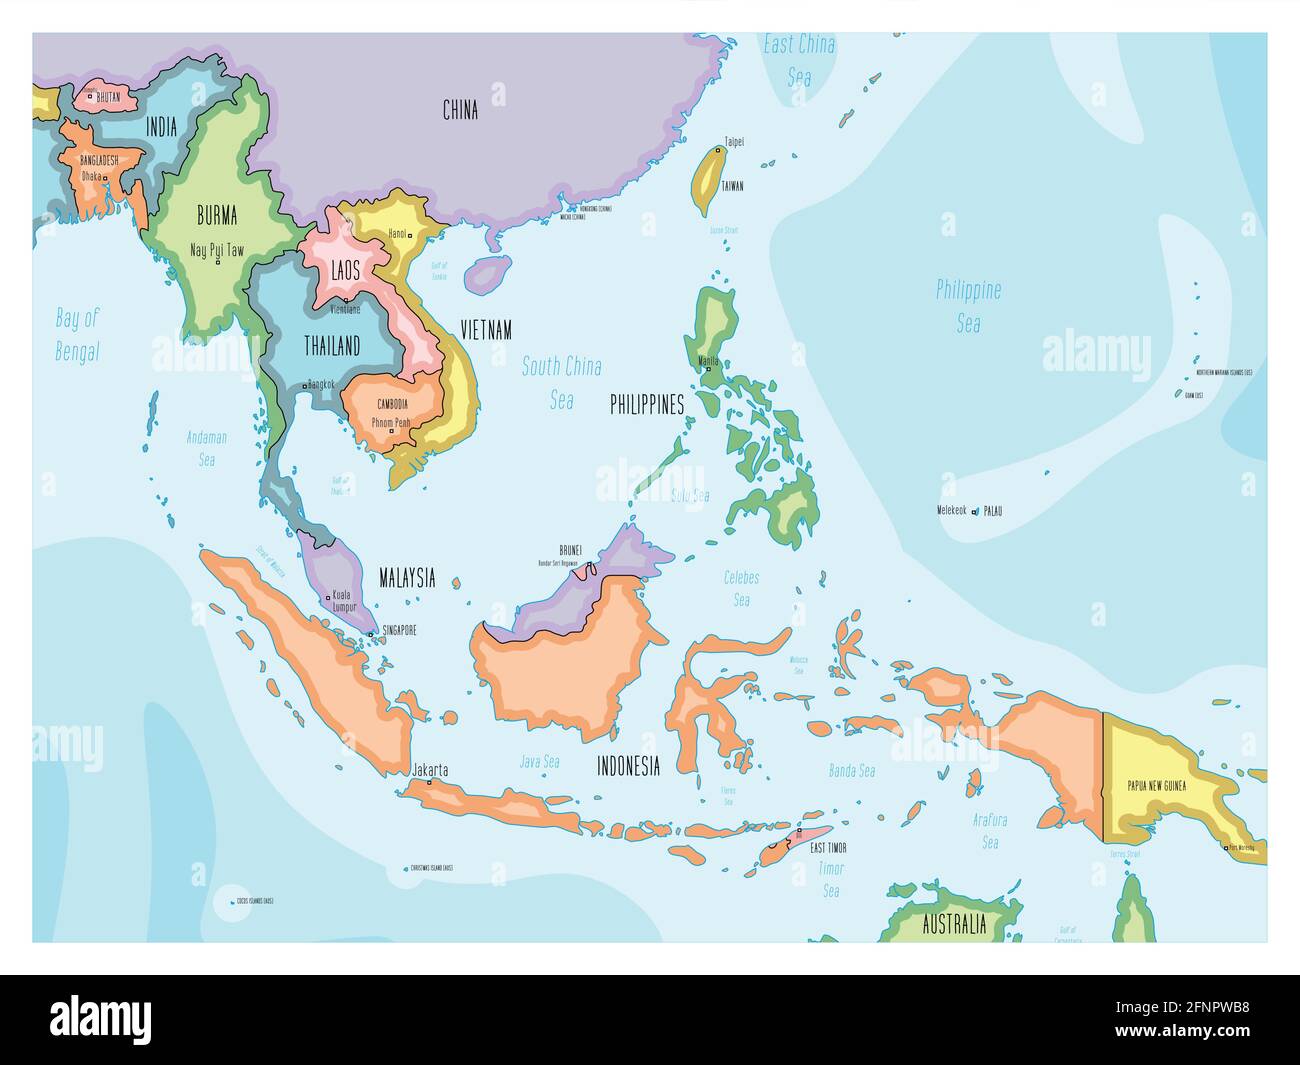 Southeast Asia map - hand-drawn cartoon style Stock Vector